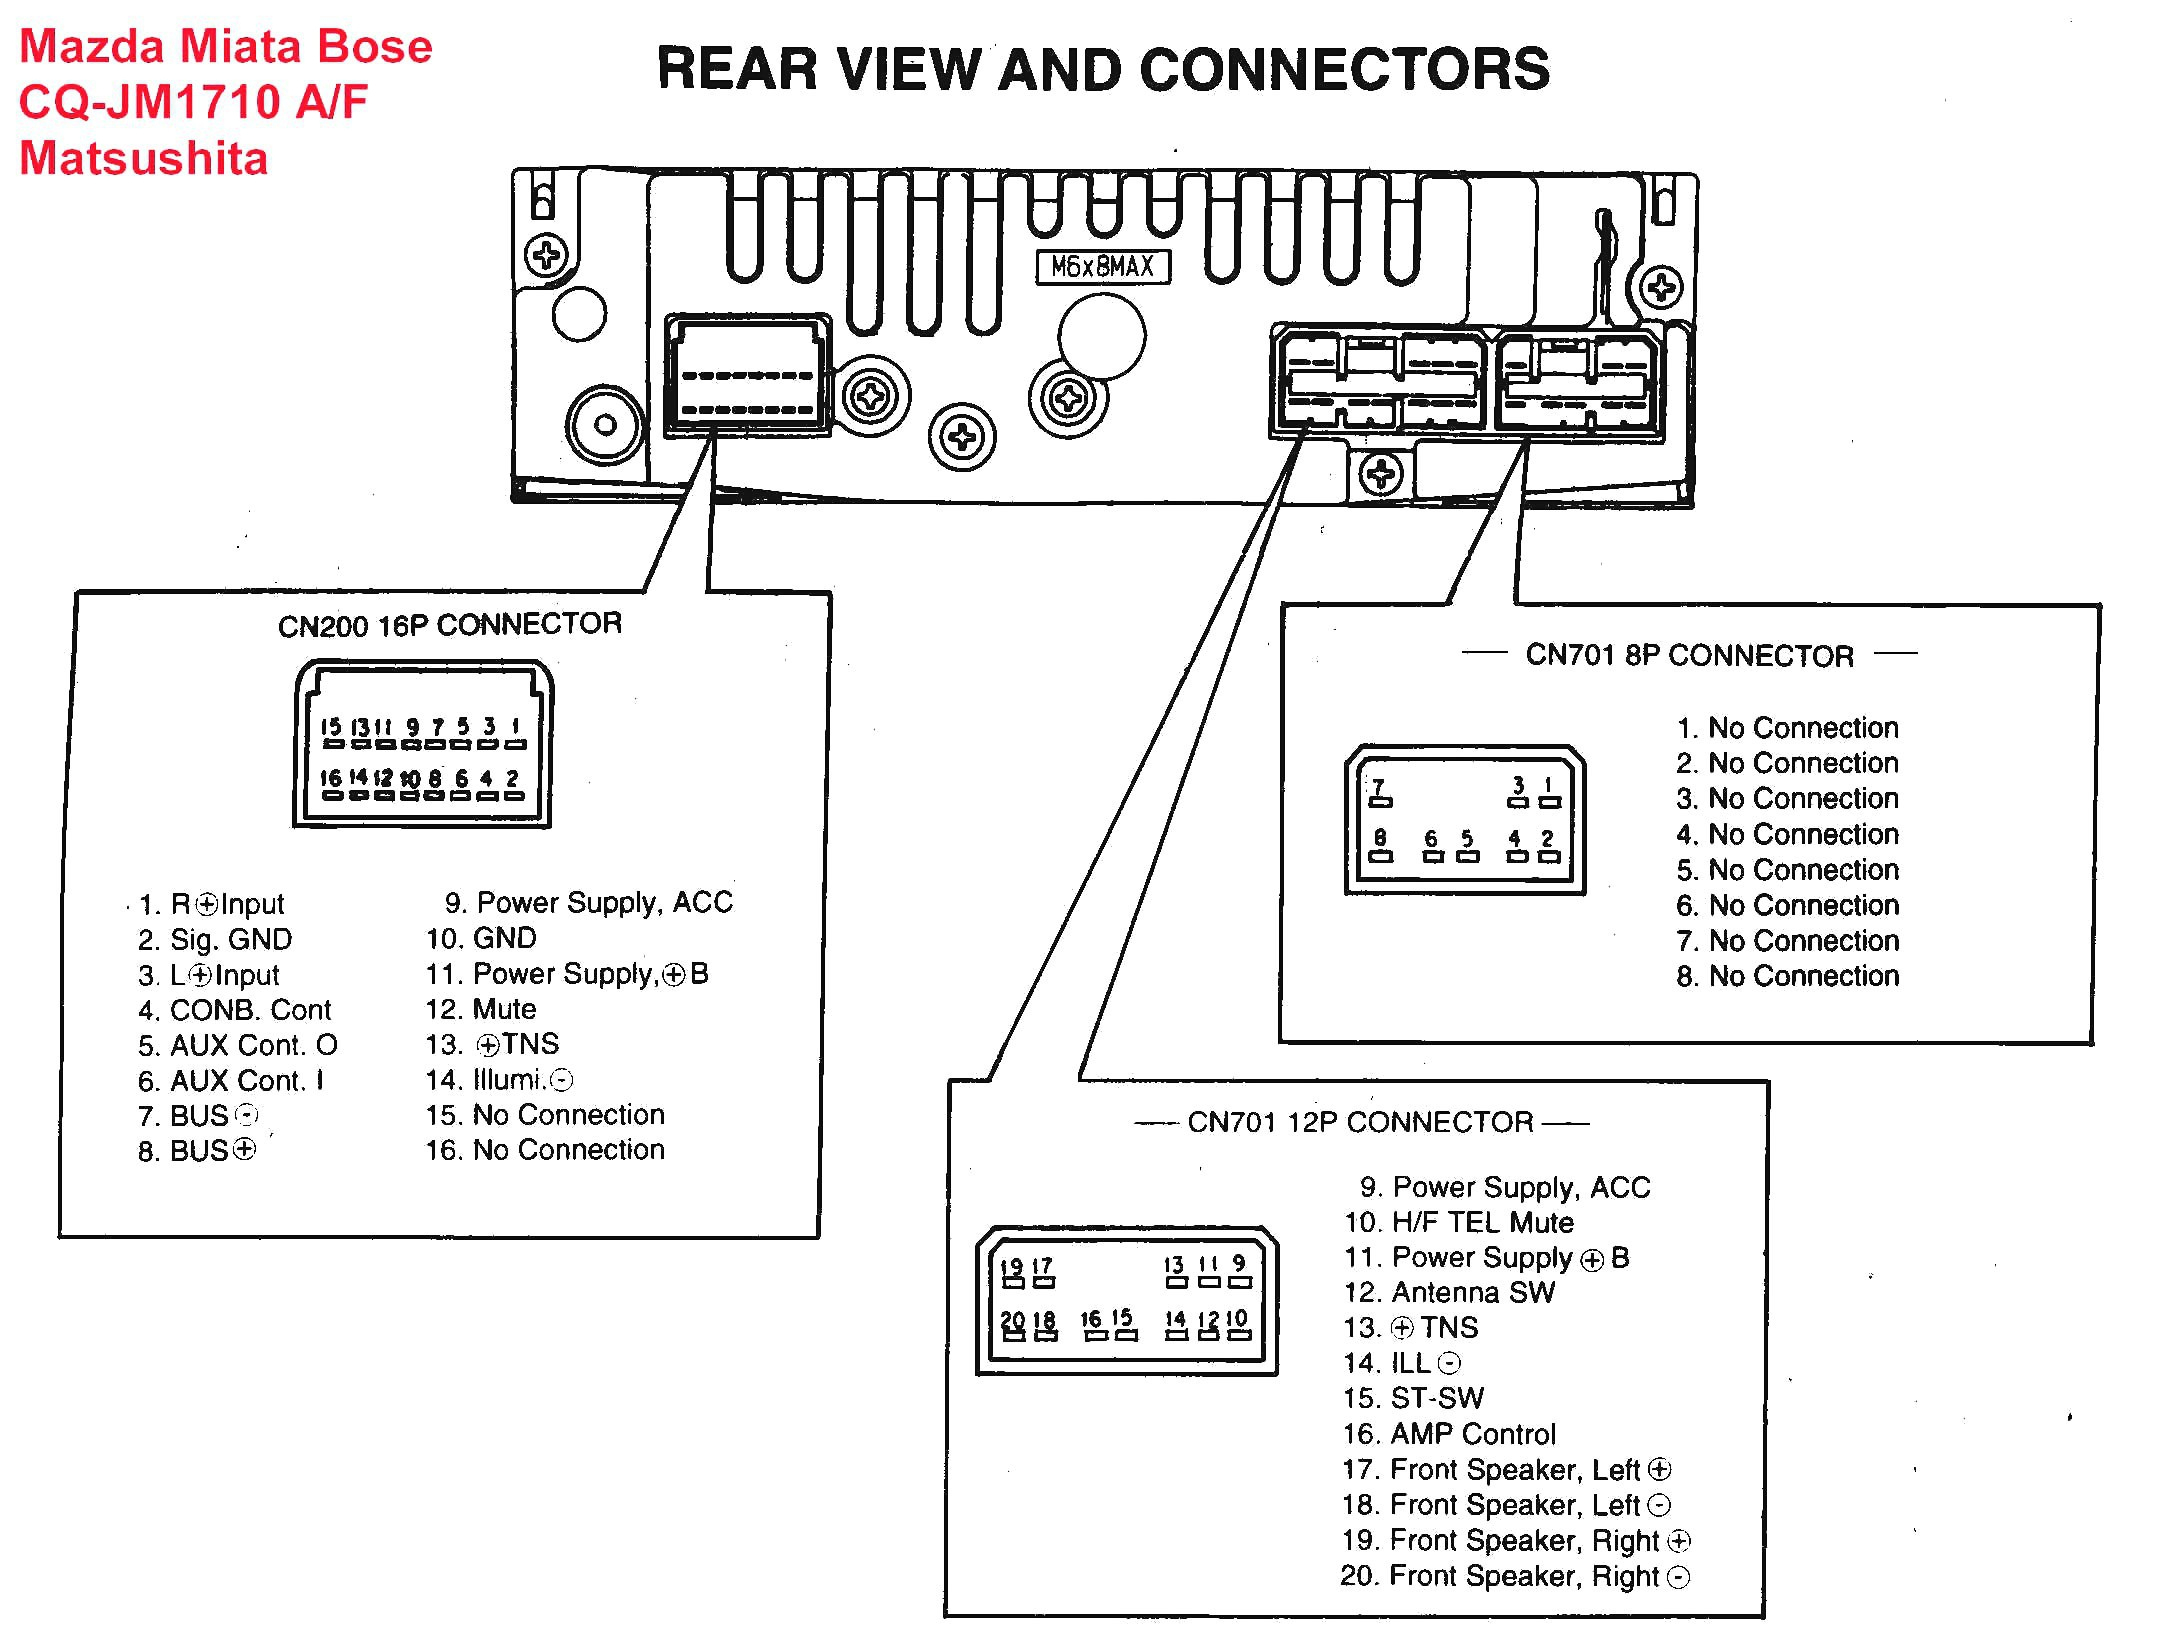 Wiring Diagram For A Pioneer Deh X6600Bt | Wiring Diagram - Pioneer Deh X6600Bt Wiring Diagram